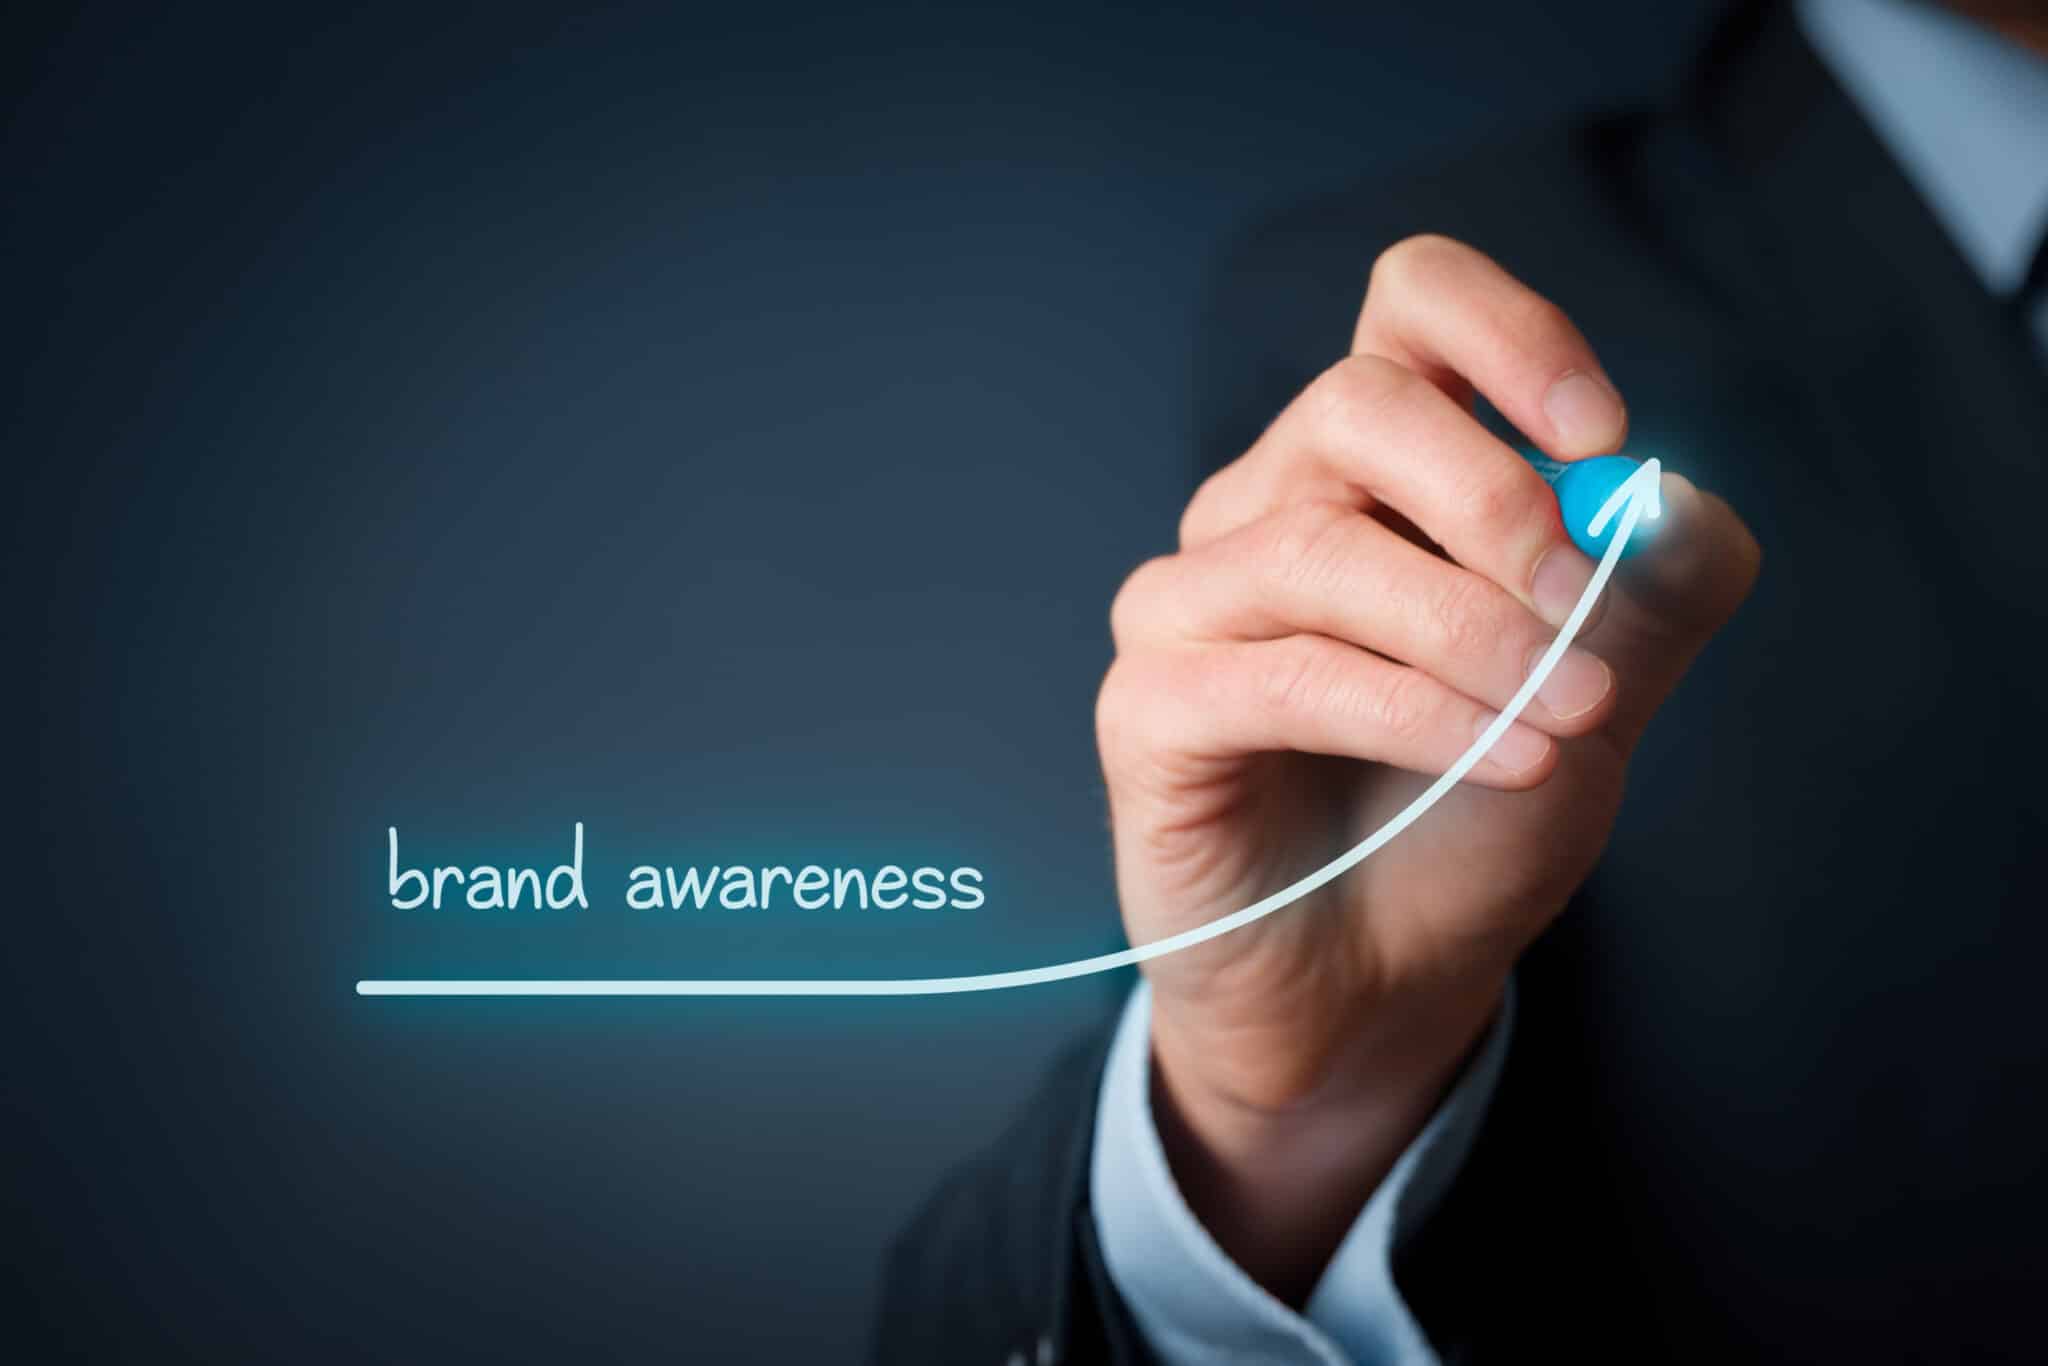 Use link building to increase brand awareness